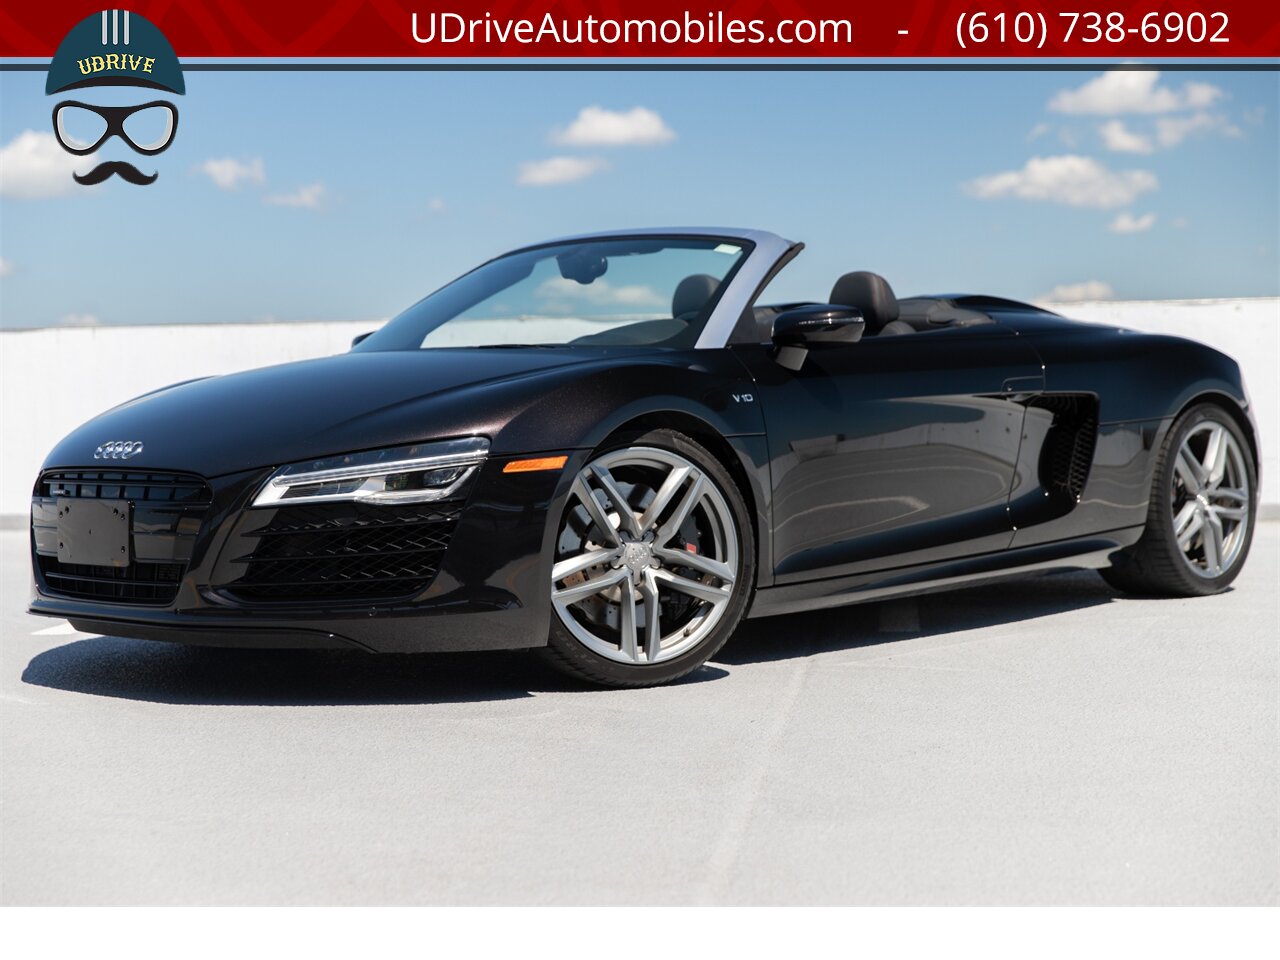 2014 Audi R8 5.2 V10 Quattro Spyder 6 Speed Manual 2k Miles  Extremely RARE 1 of 1 Color Combo - Photo 1 - West Chester, PA 19382